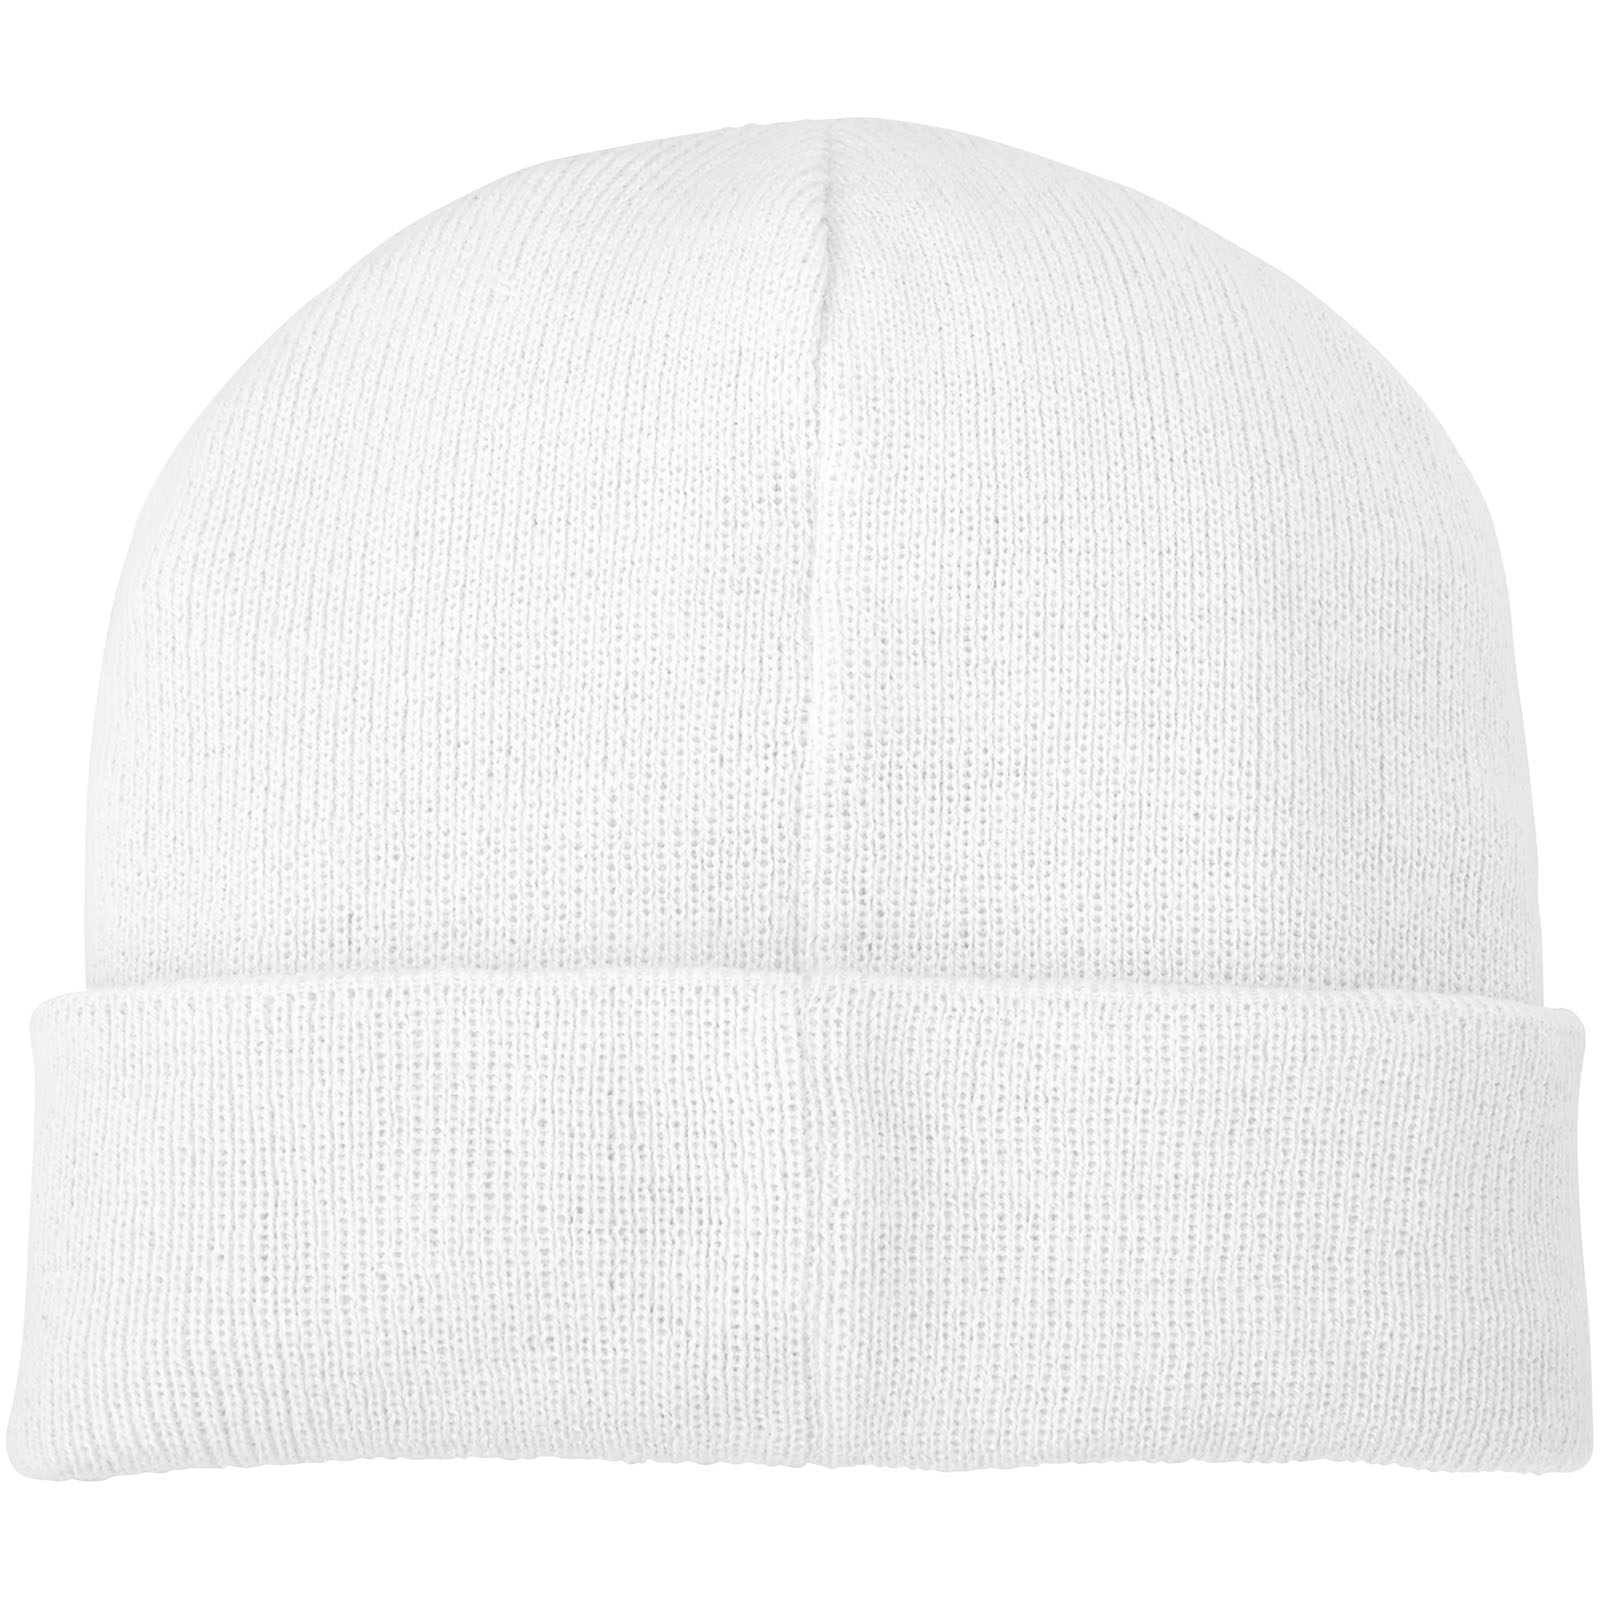 Advertising Beanies - Boreas beanie with patch - 2